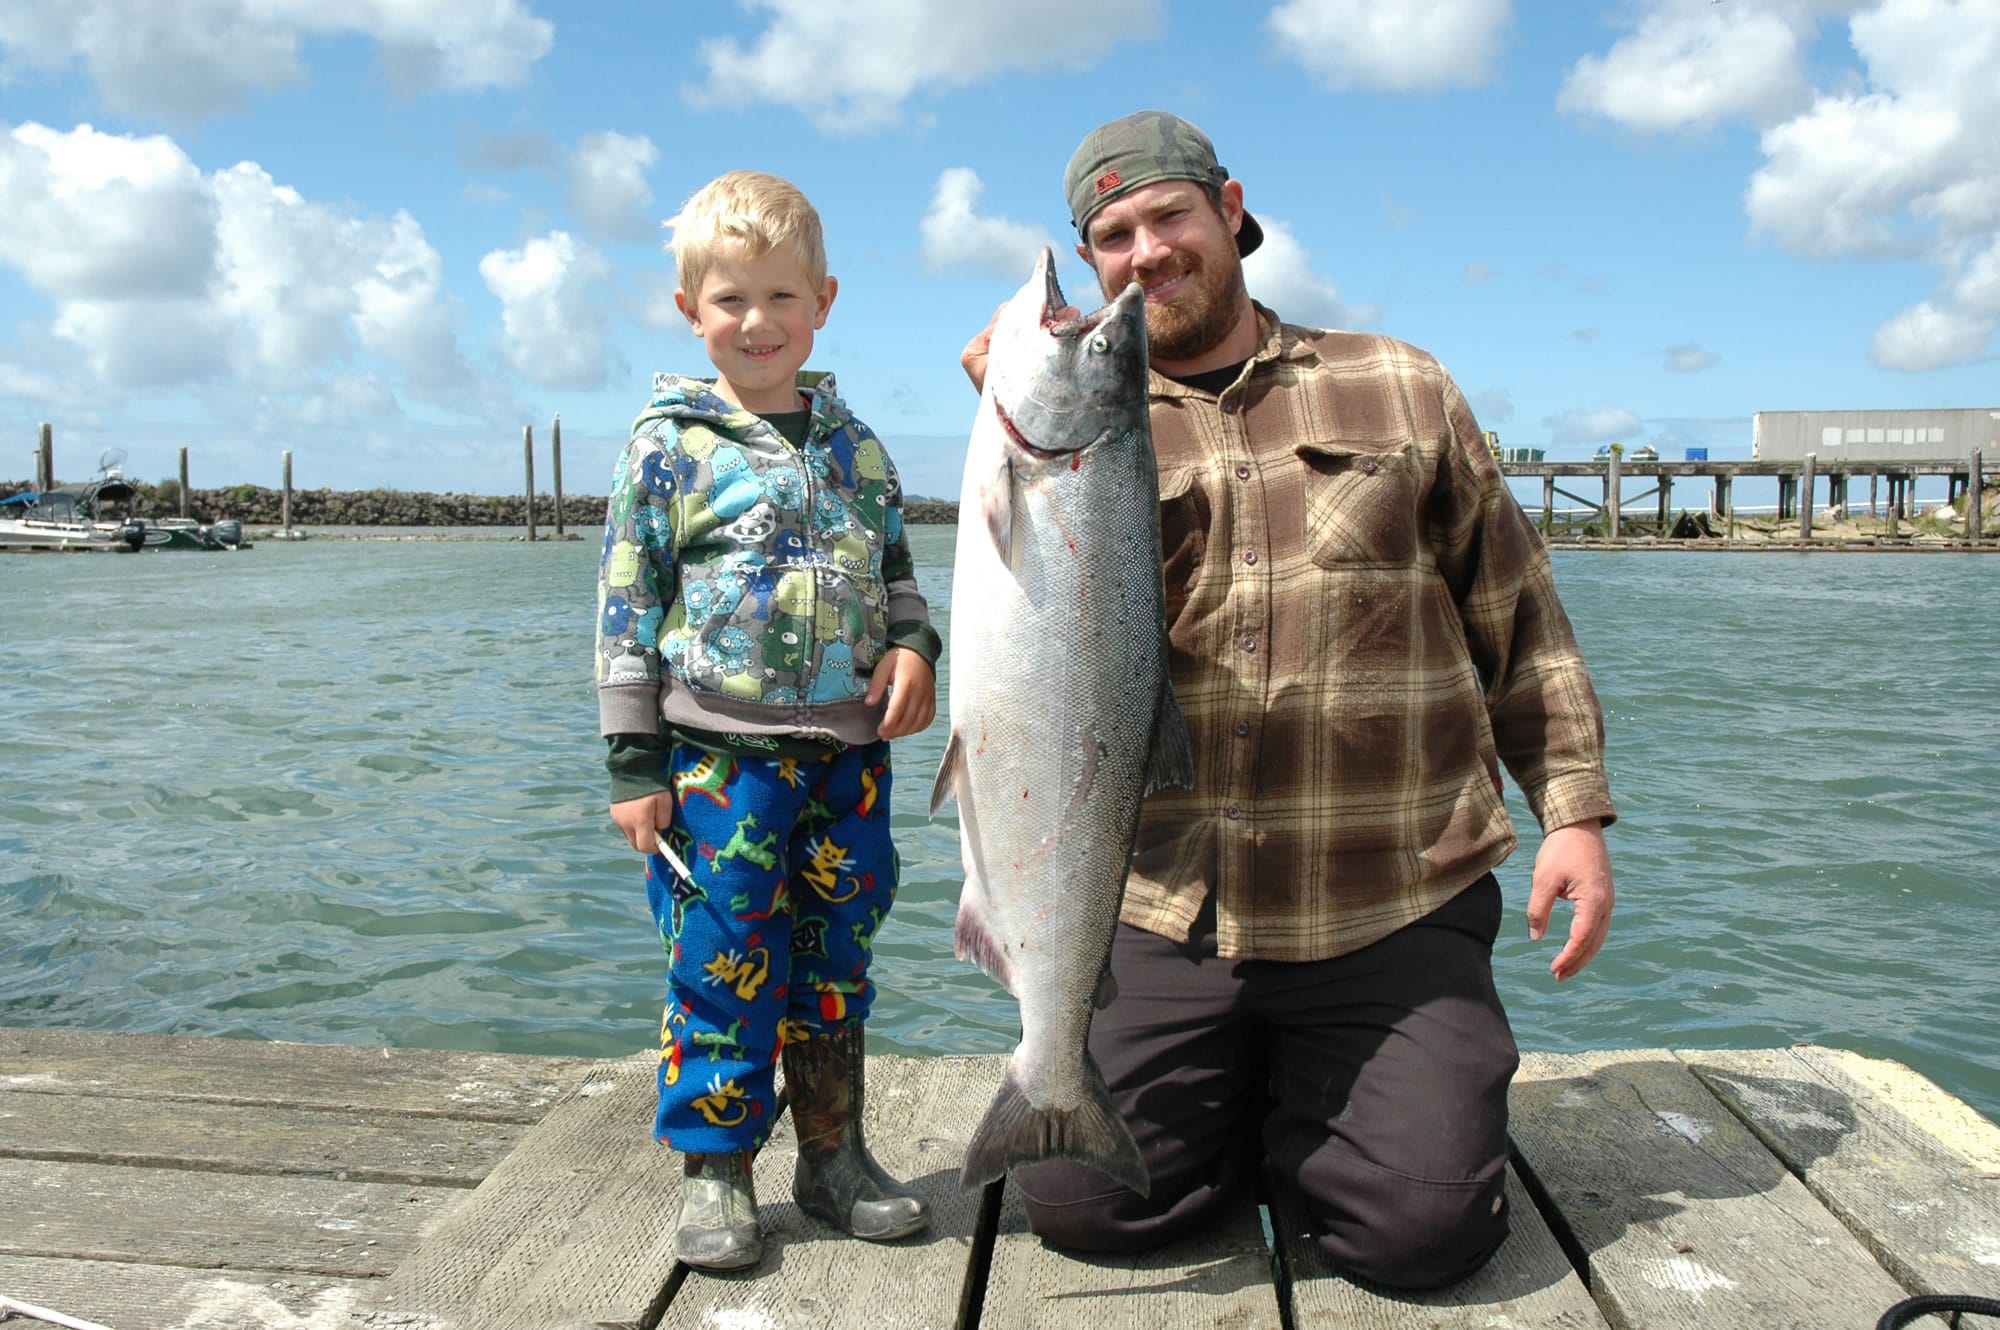 Matix Pardue poses with his dad, Eli, and a fall chinook salmon caught in the Buoy 10 fishery at the mouth of the Columbia River in 2012.